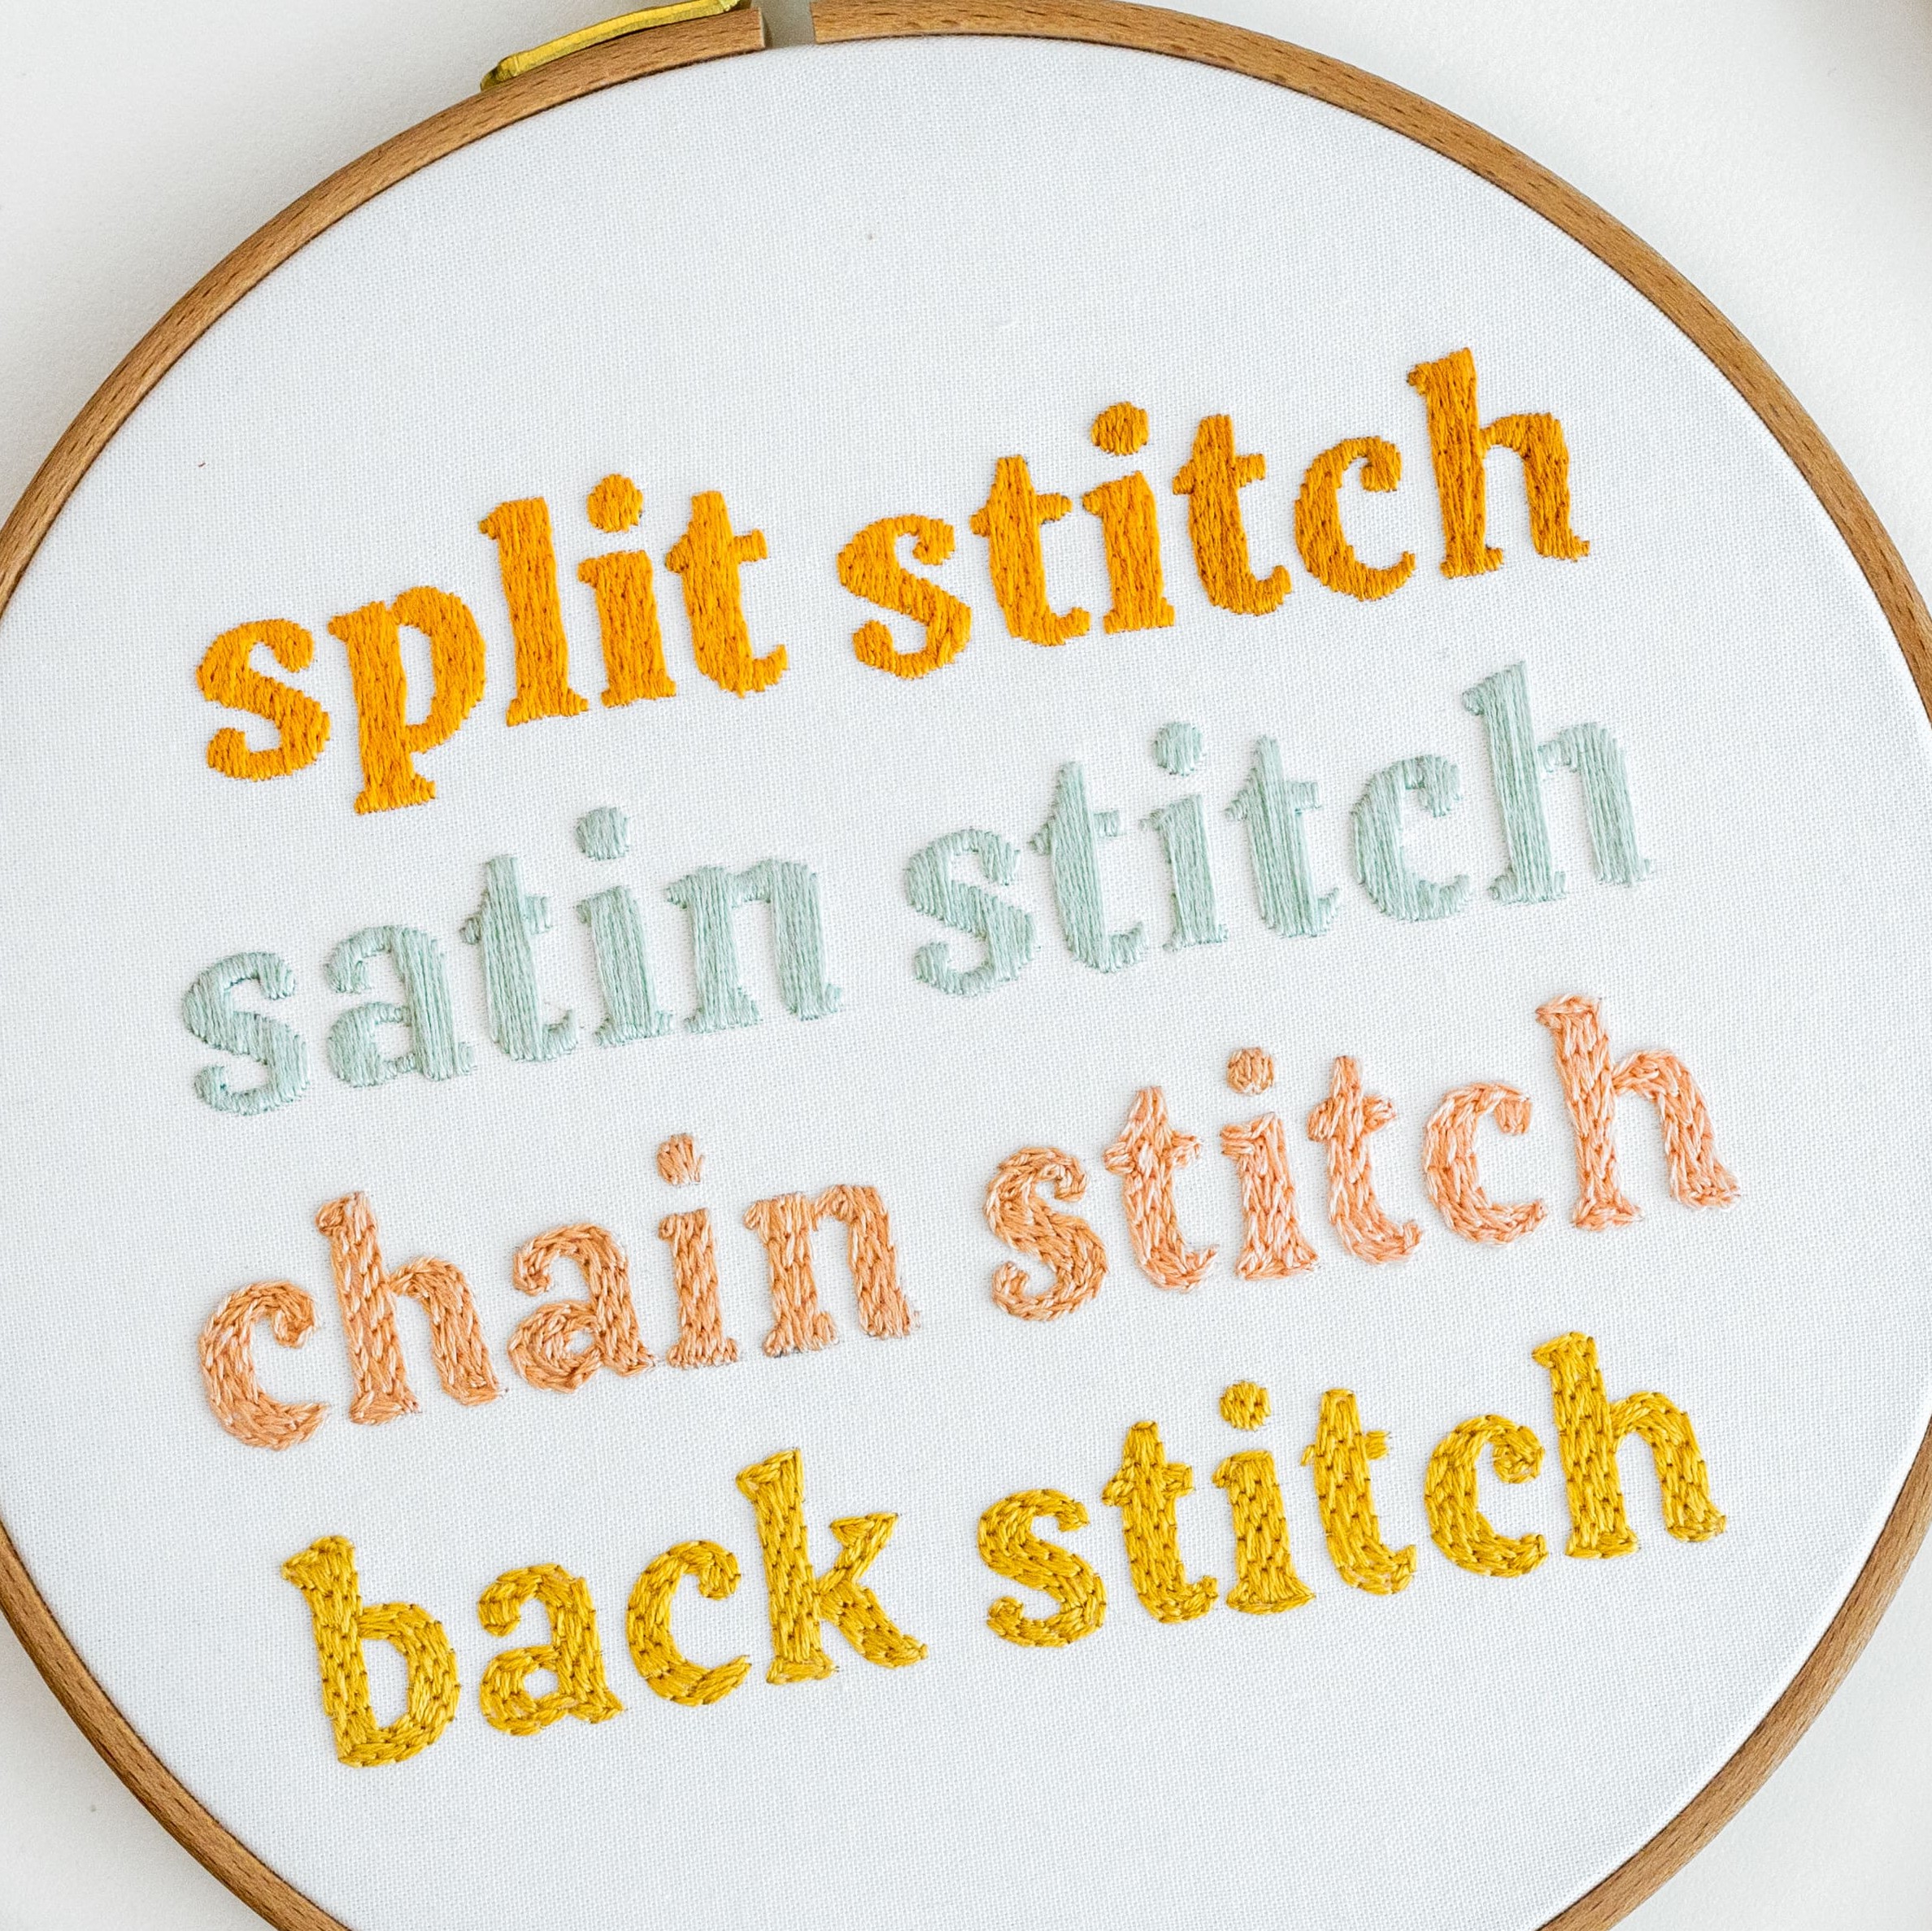 Words are stitched on an embroidery hoop with split stitch, satin stitch, chain stitch, and back stitch.